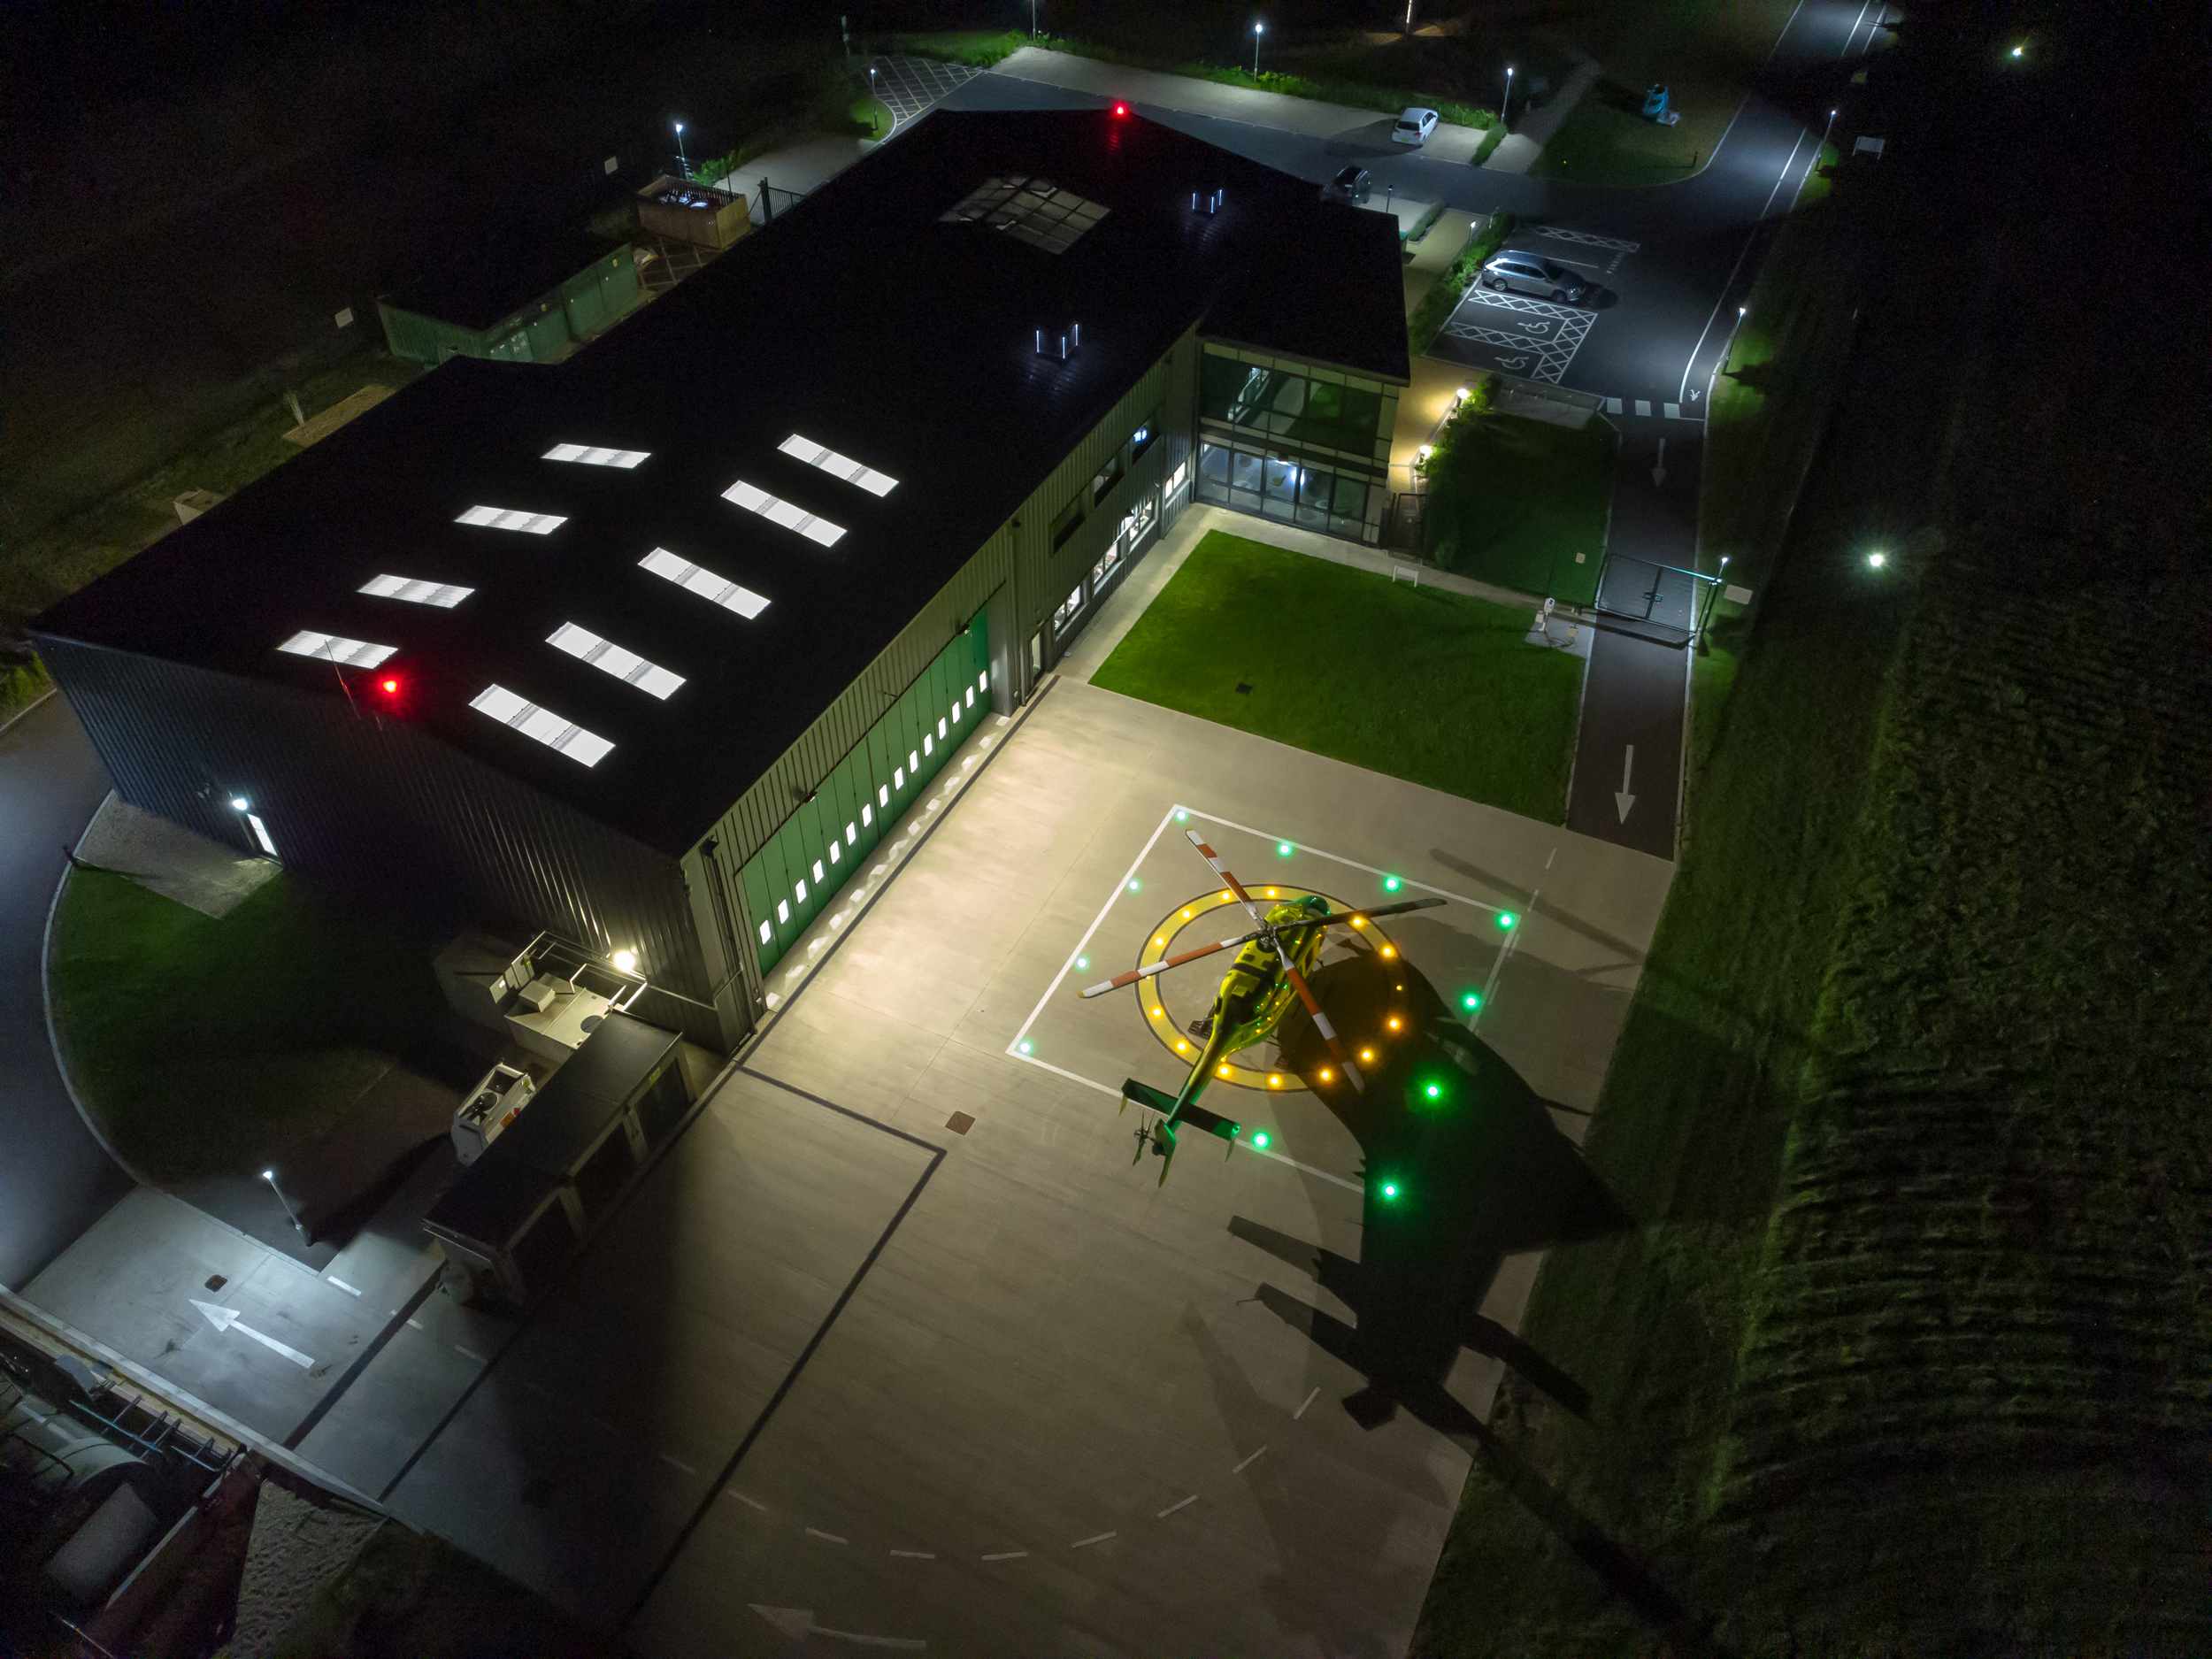 An aerial photo of Helimed 22 on the helipad at the Wiltshire Air Ambulance airbase at night